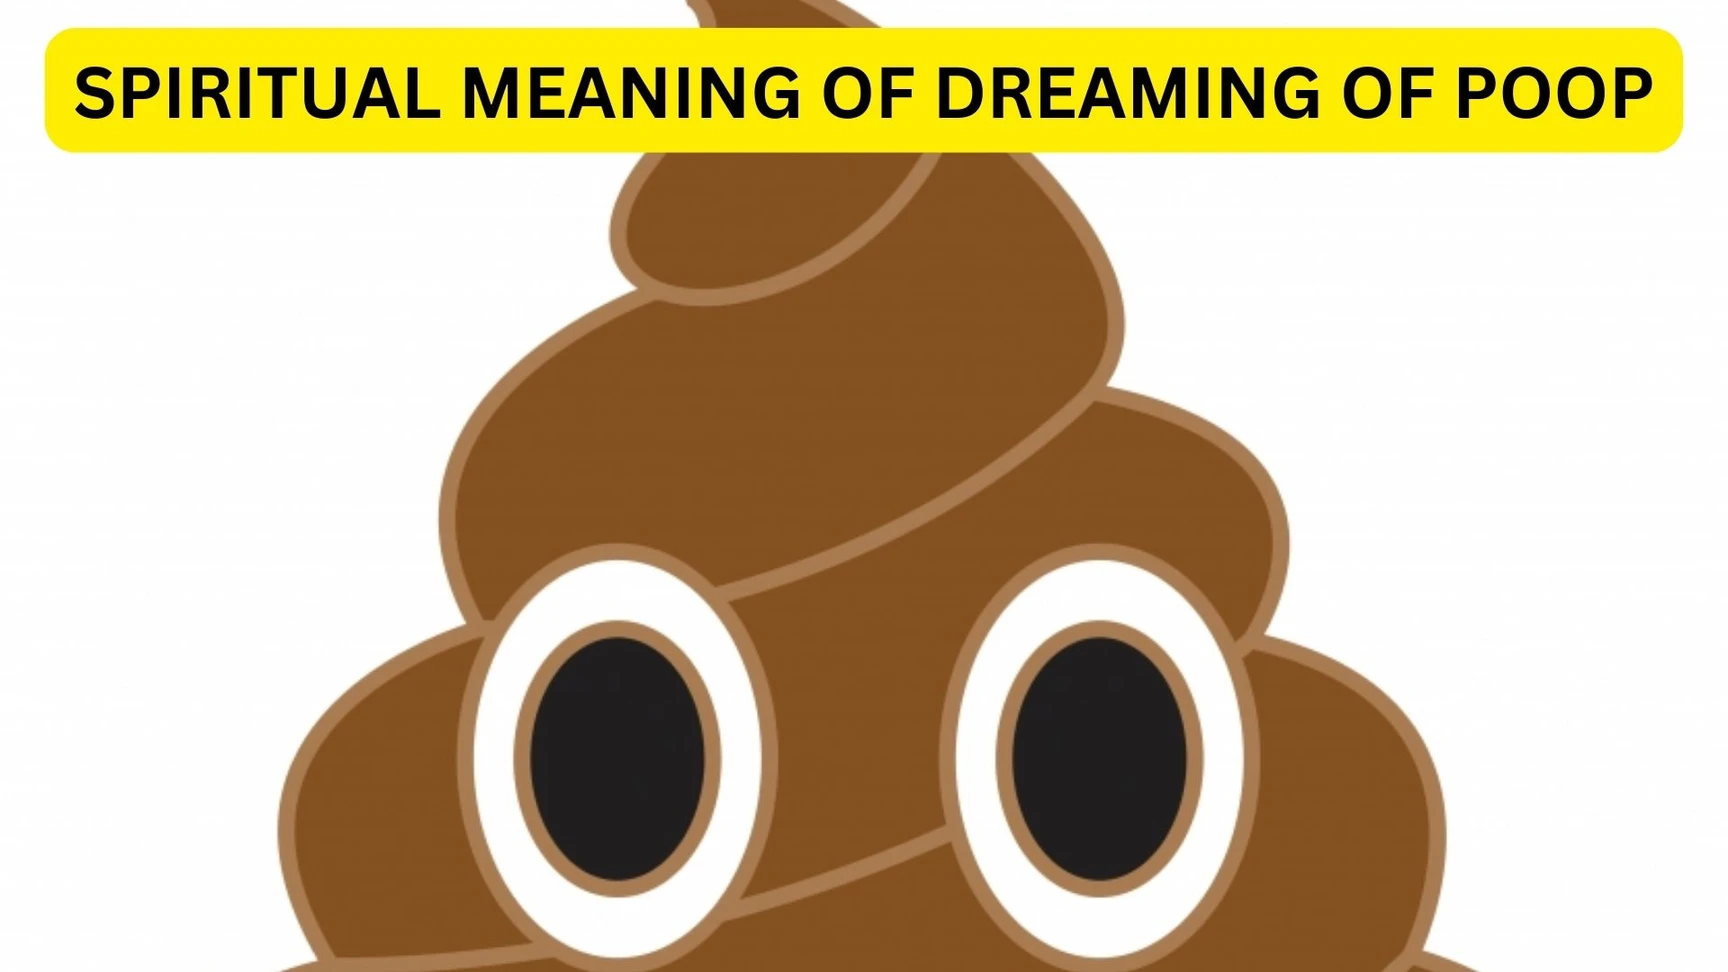 What Does Dreaming Of Pooping A Lot Mean?